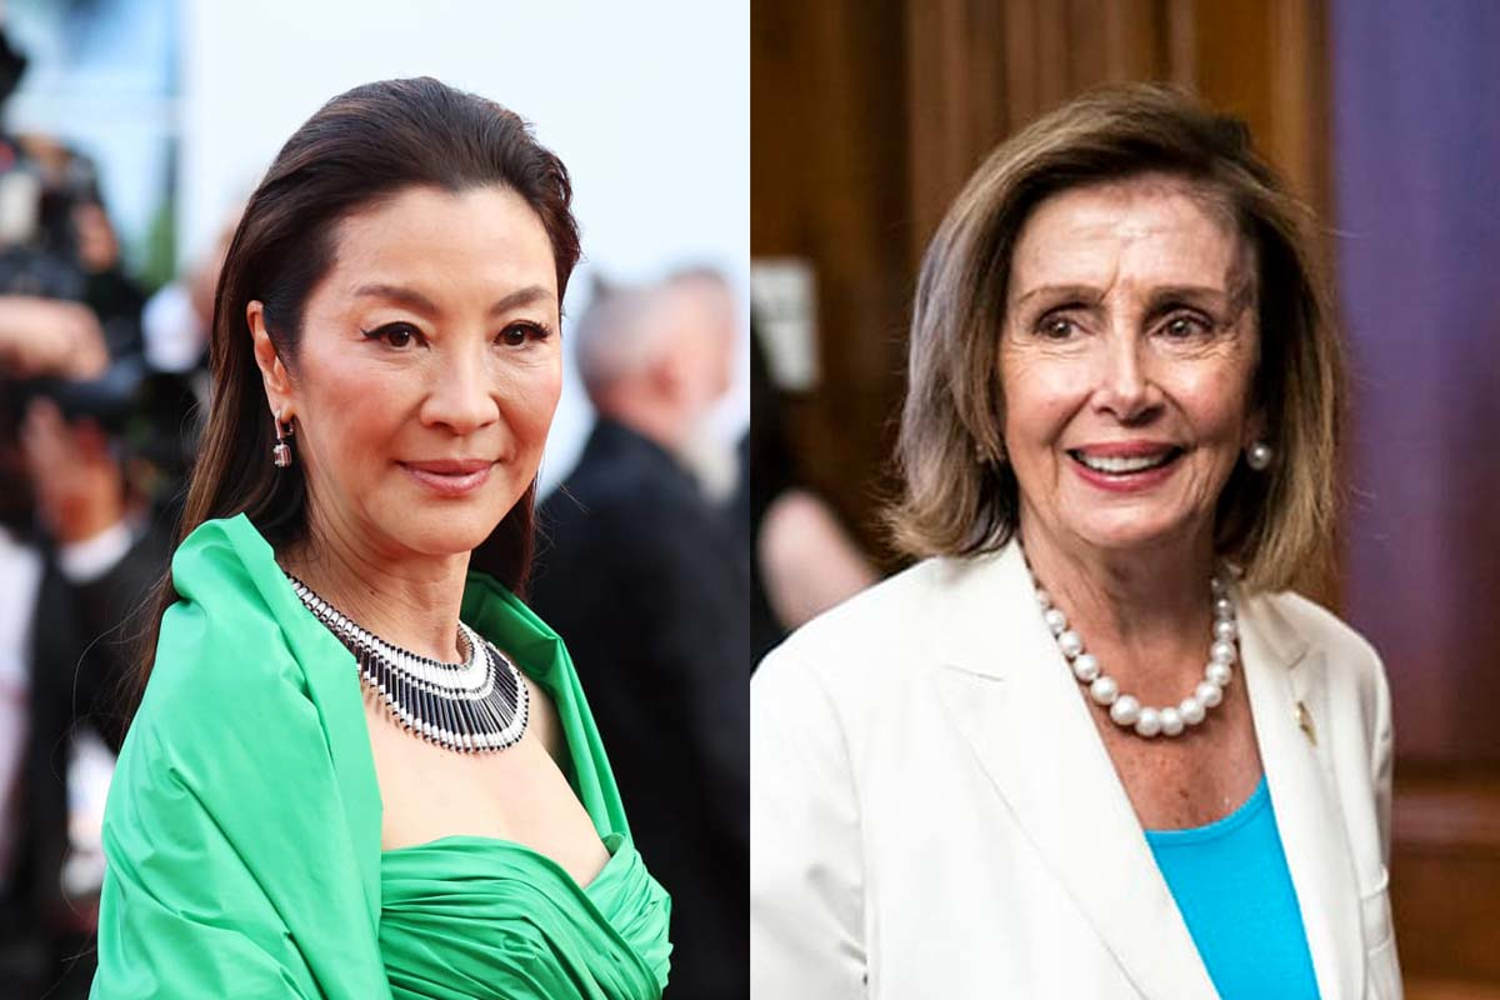 Biden awards Presidential Medal of Freedom to recipients including Nancy Pelosi and Michelle Yeoh